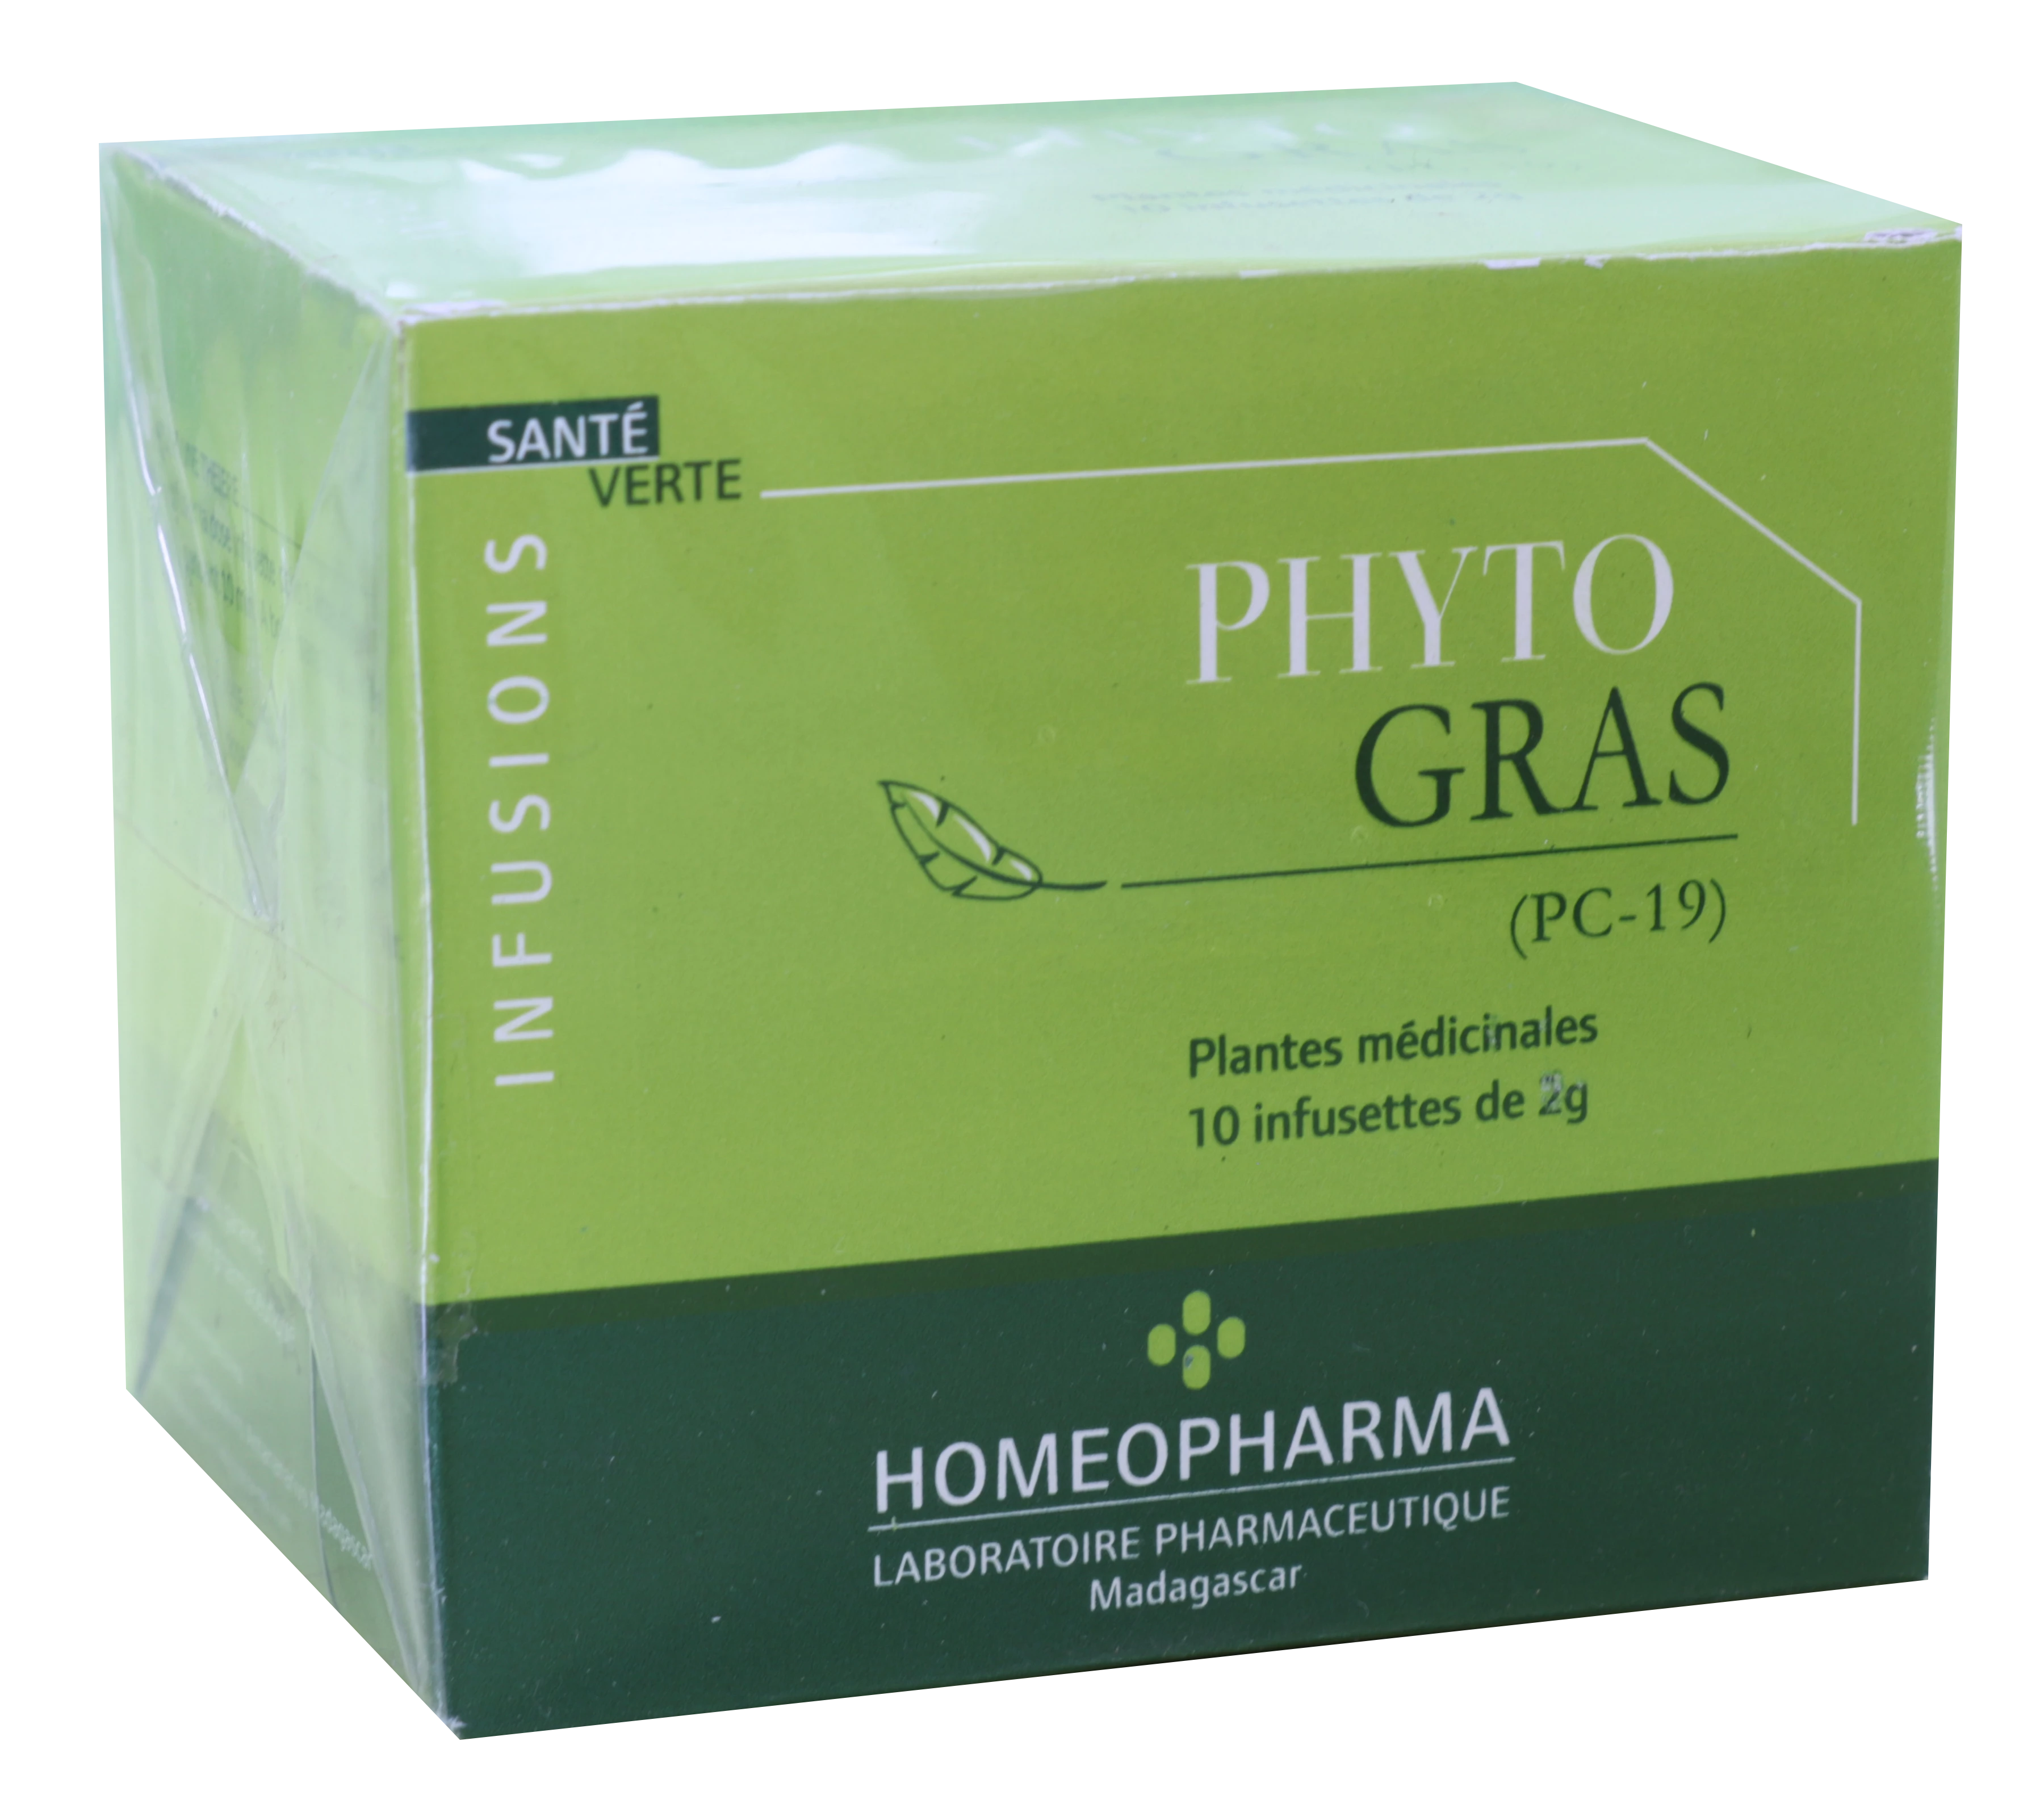 Traditional Phytotherapy Pc19-phyto-gras Box 20 Infusettes - HOMEOPHARMA